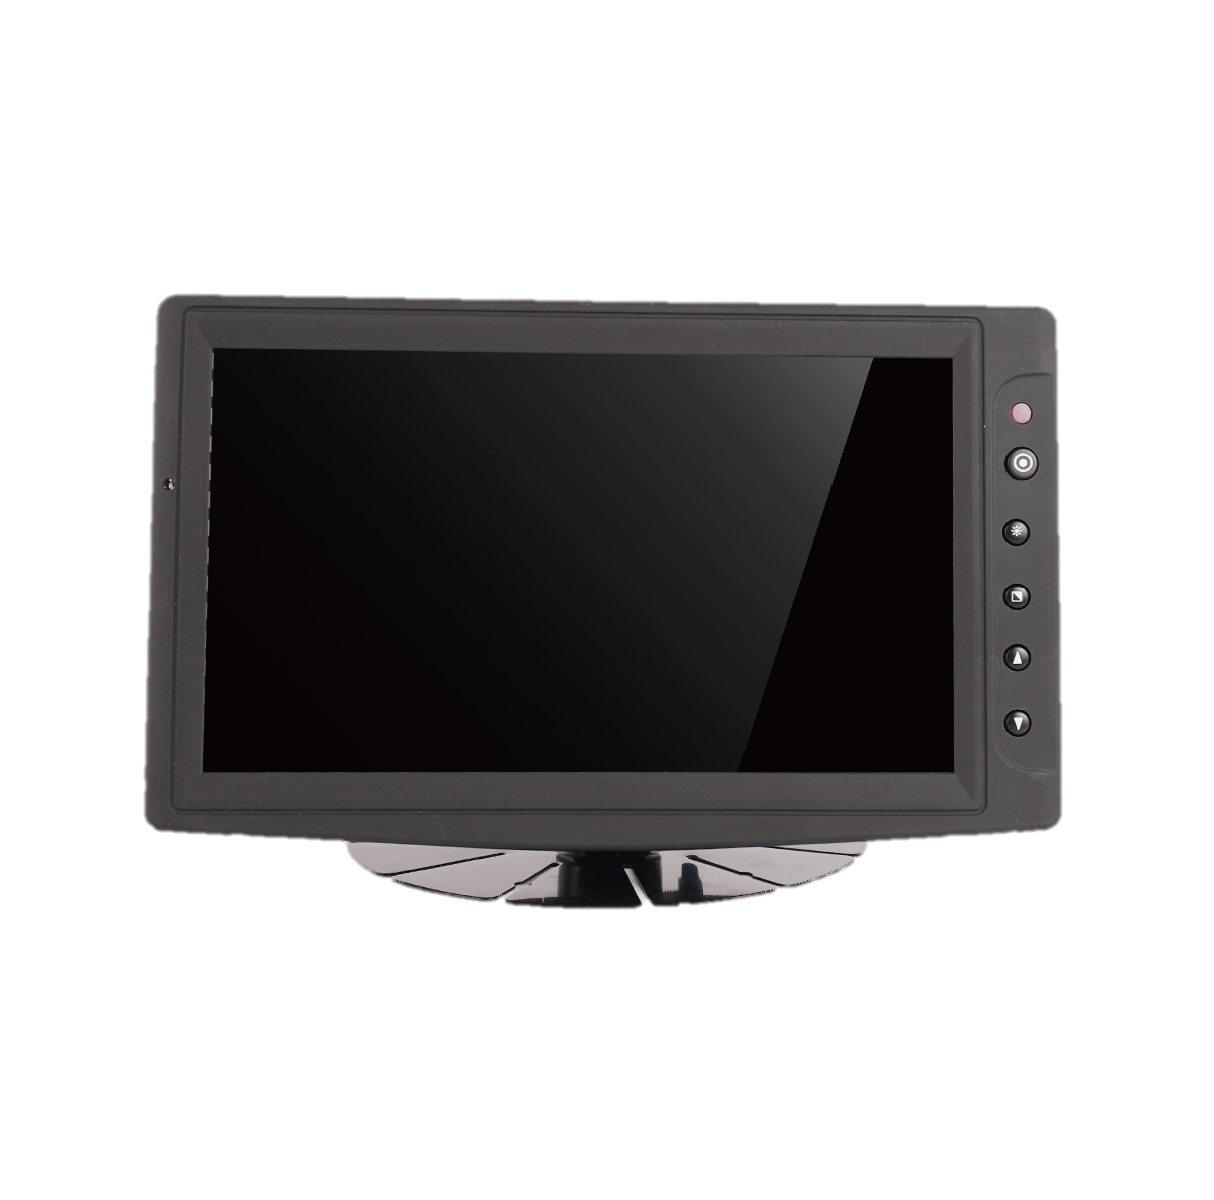 SEF800TPC(W)-LUH is an industrial touch monitor.